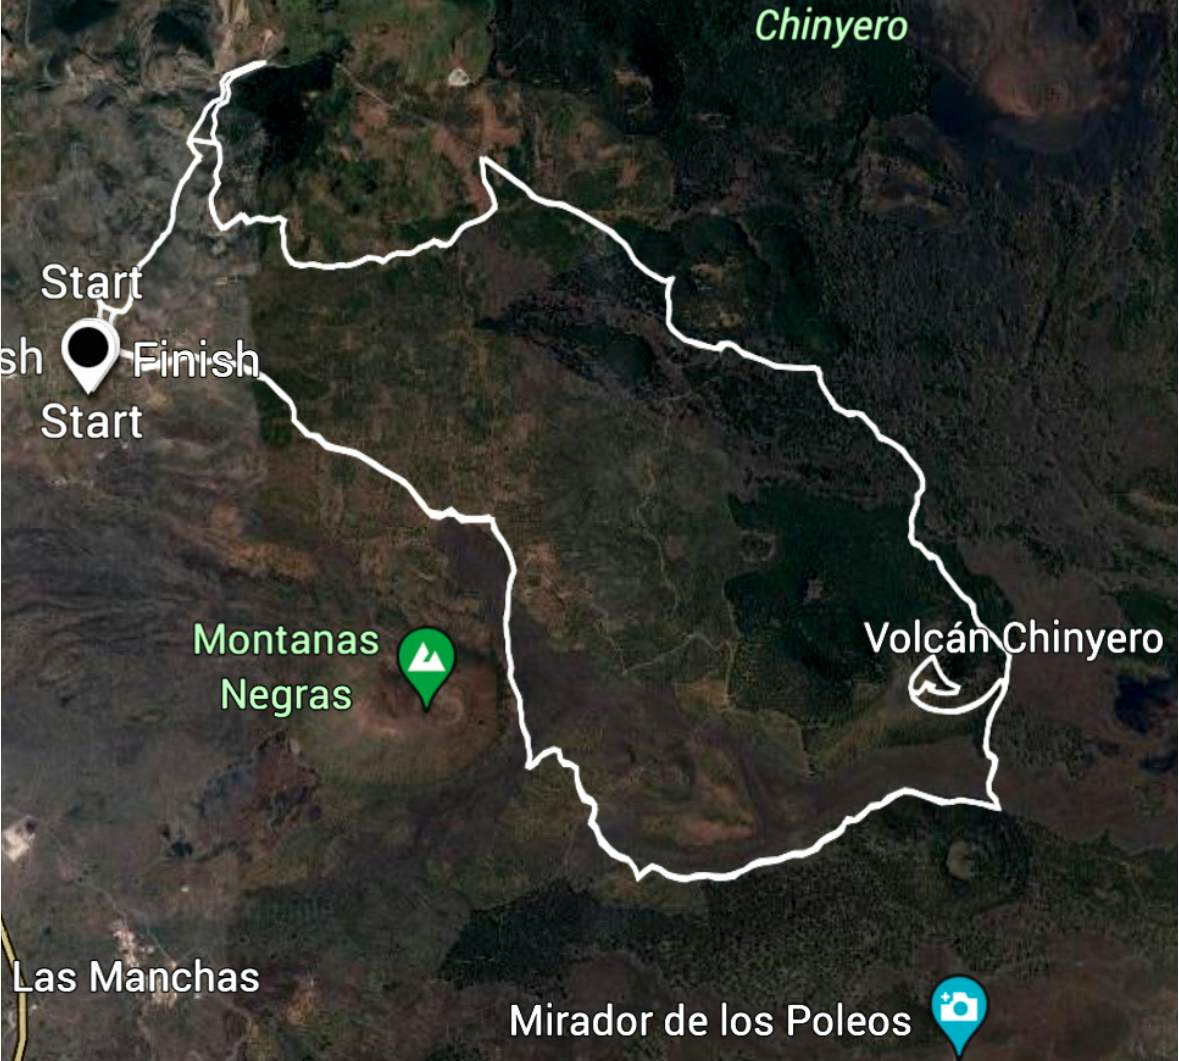 Track of the Valle de Arriba circular hike with ascent of the Montaña de la Cruz and small bypass road (top left)